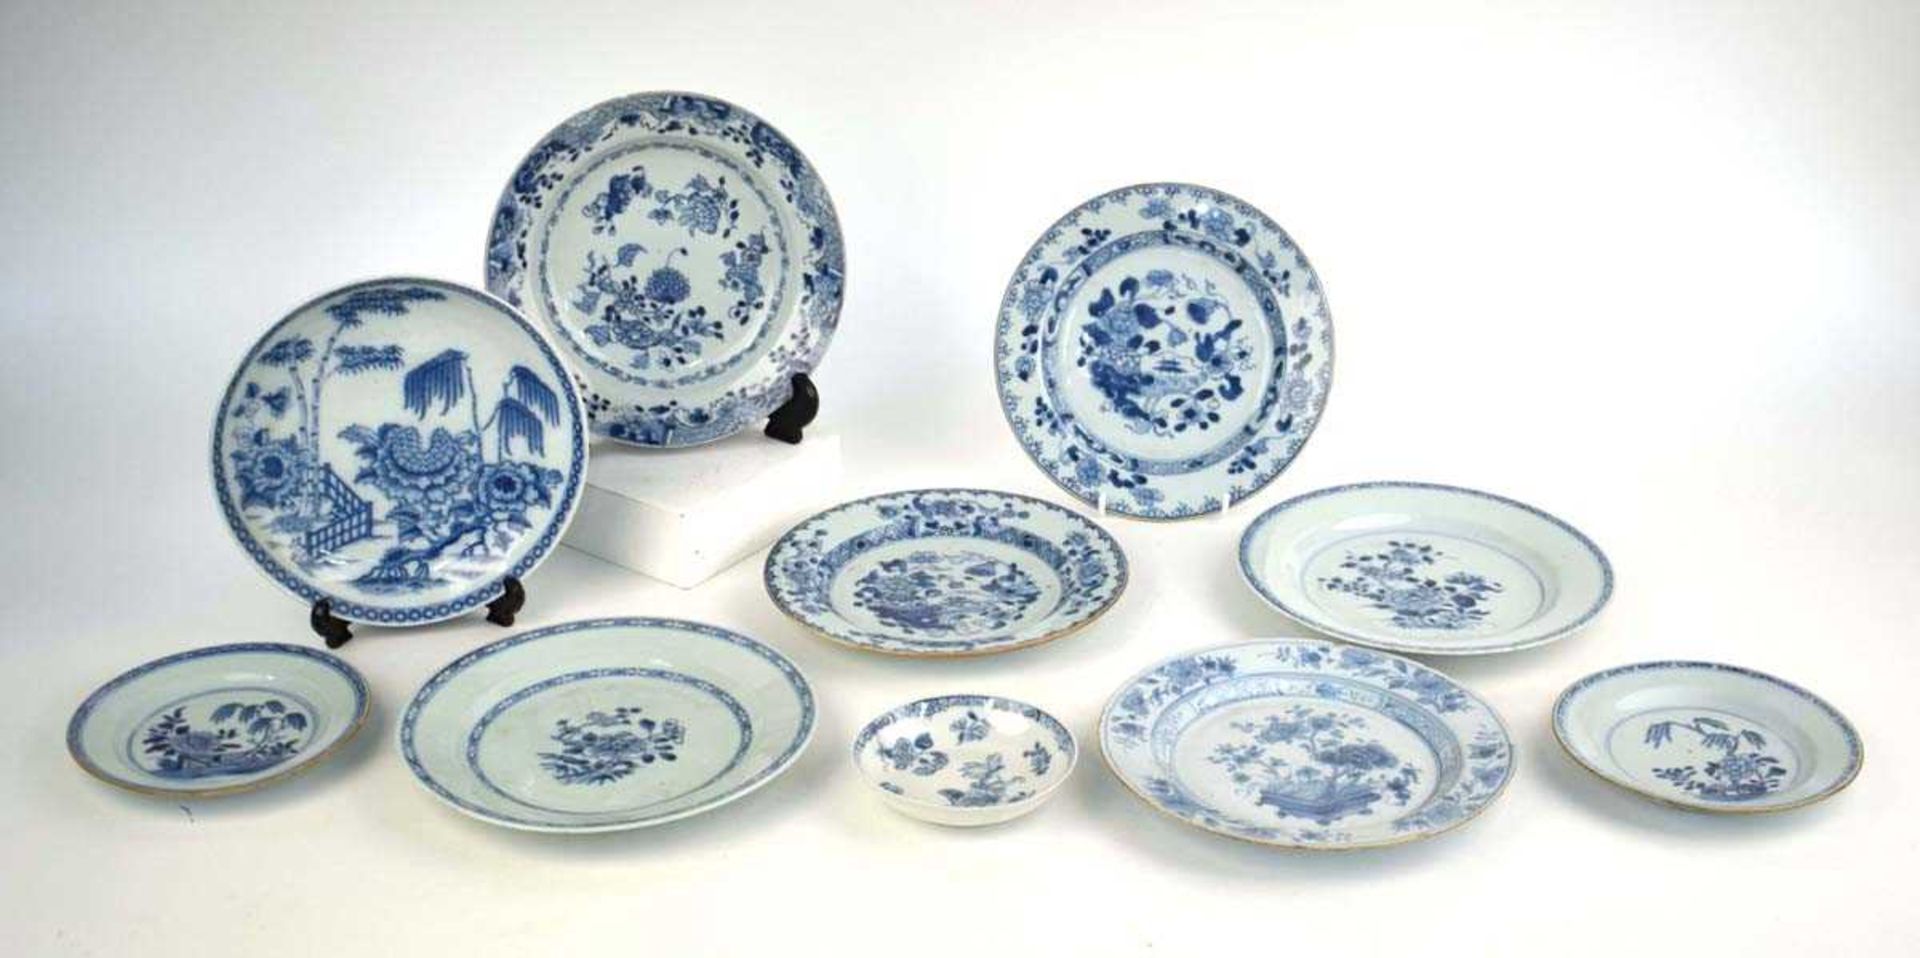 A Chinese blue and white side plate, centrally decorated with floral blooms within a diamond